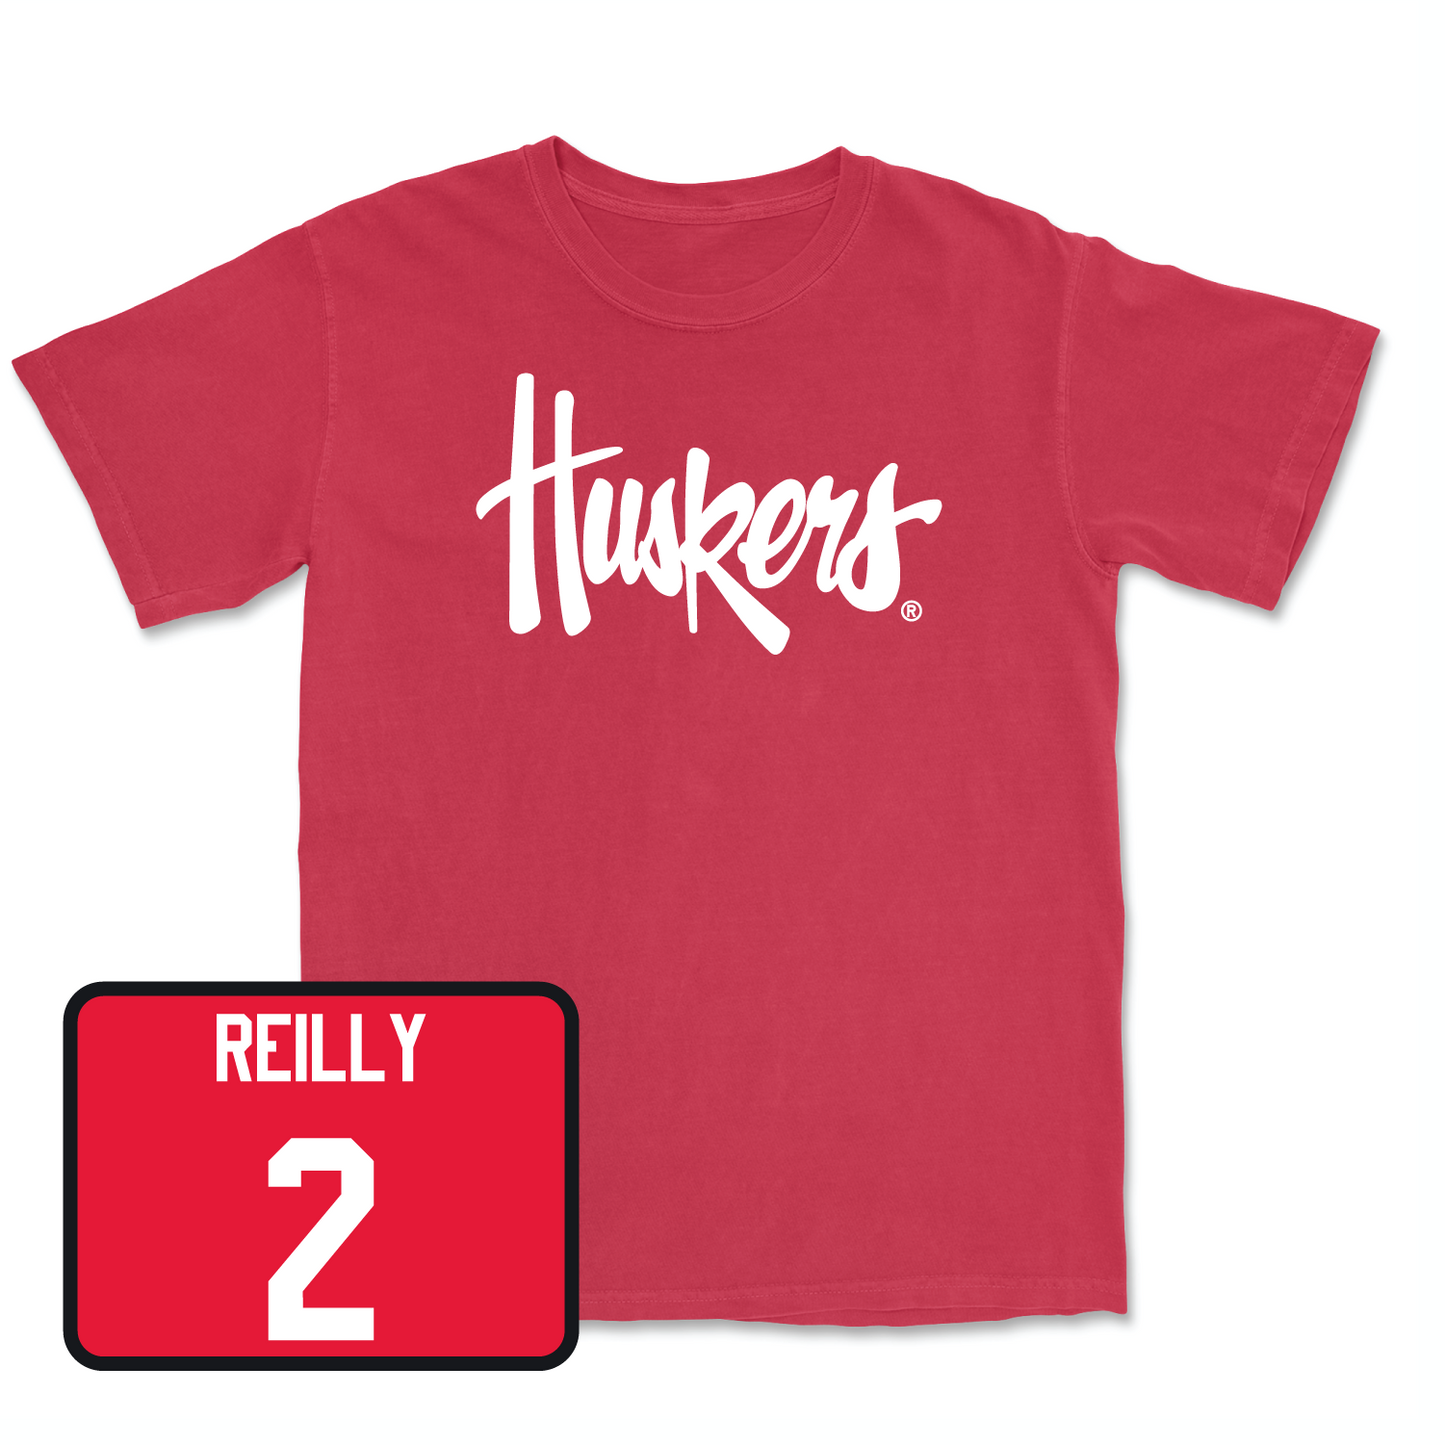 Red Women's Volleyball Huskers Tee Large / Bergen Reilly | #2